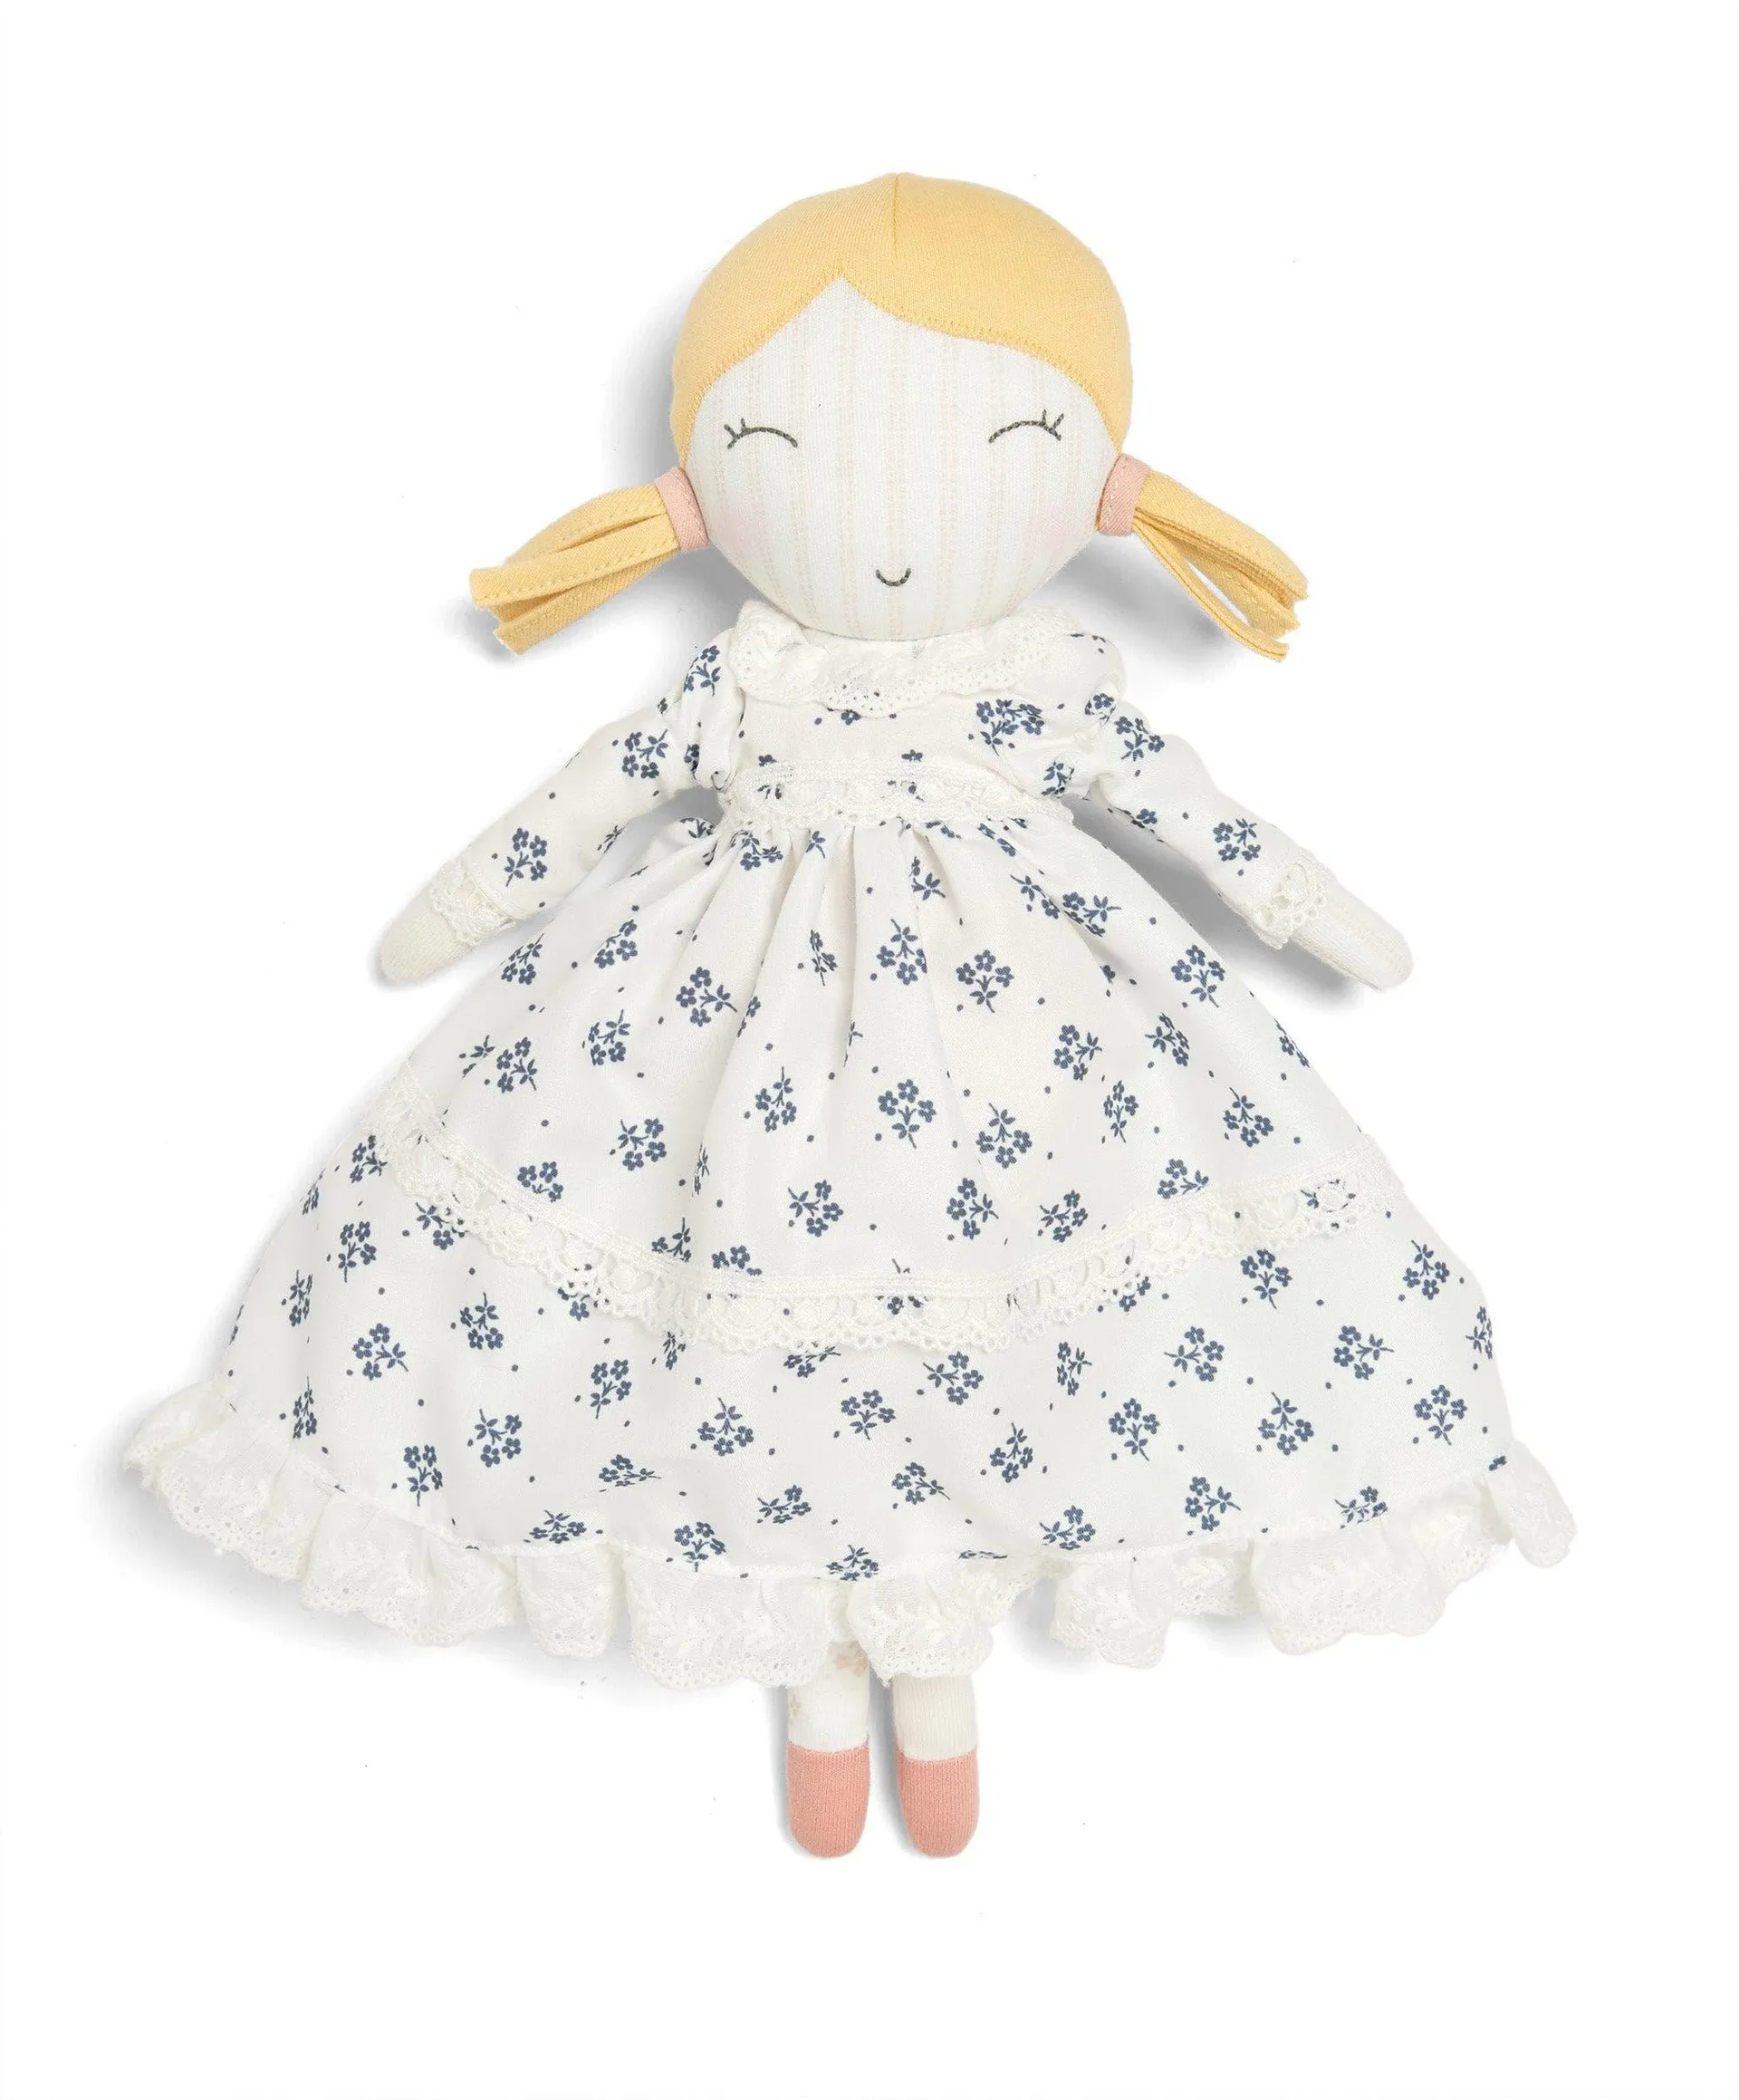 Laura Ashley Dress Up Doll - Lily